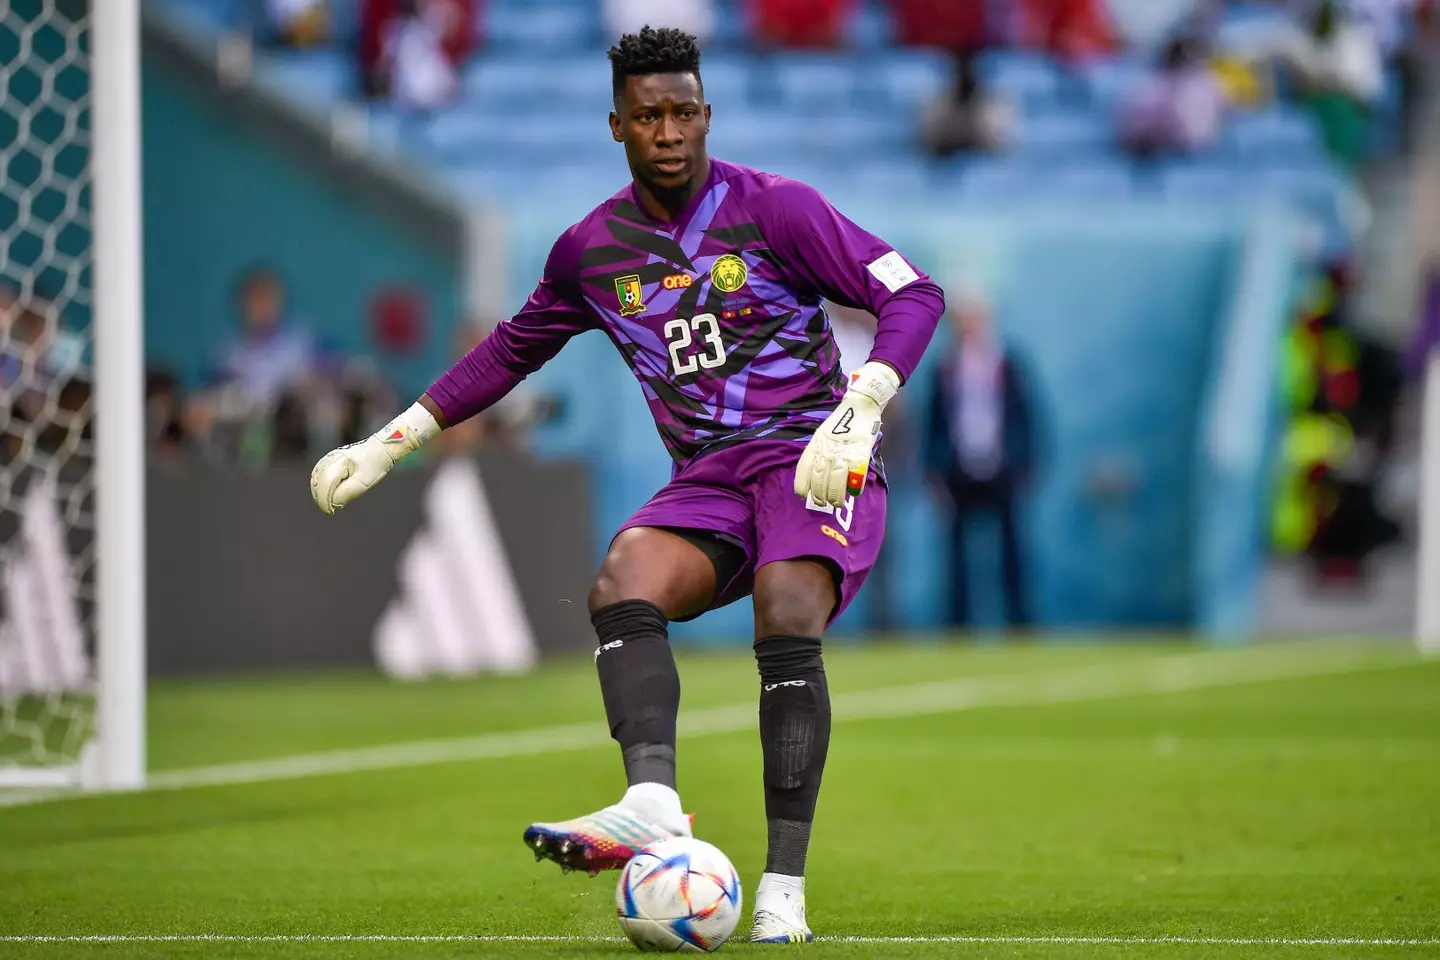 Cameroon manager Rigobert Song made the shock decision to drop Andre Onana for the World Cup match against Serbia.